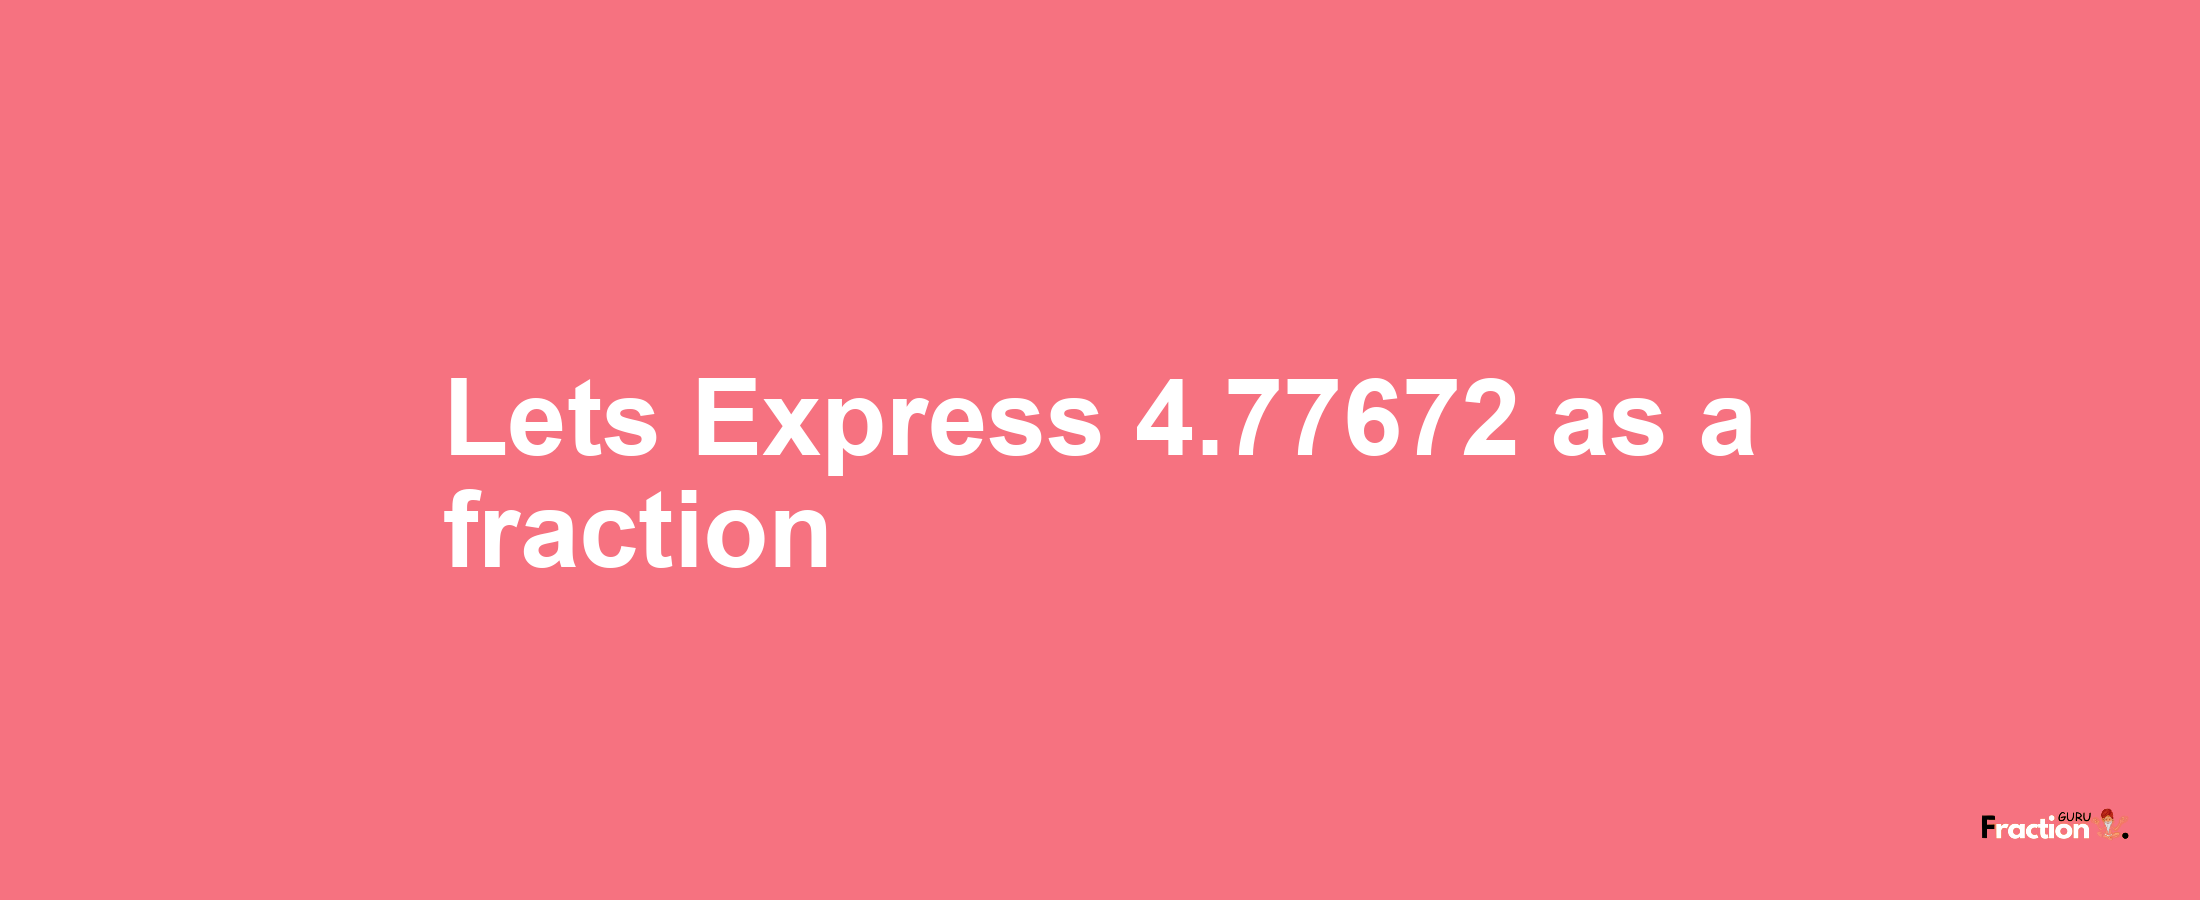 Lets Express 4.77672 as afraction